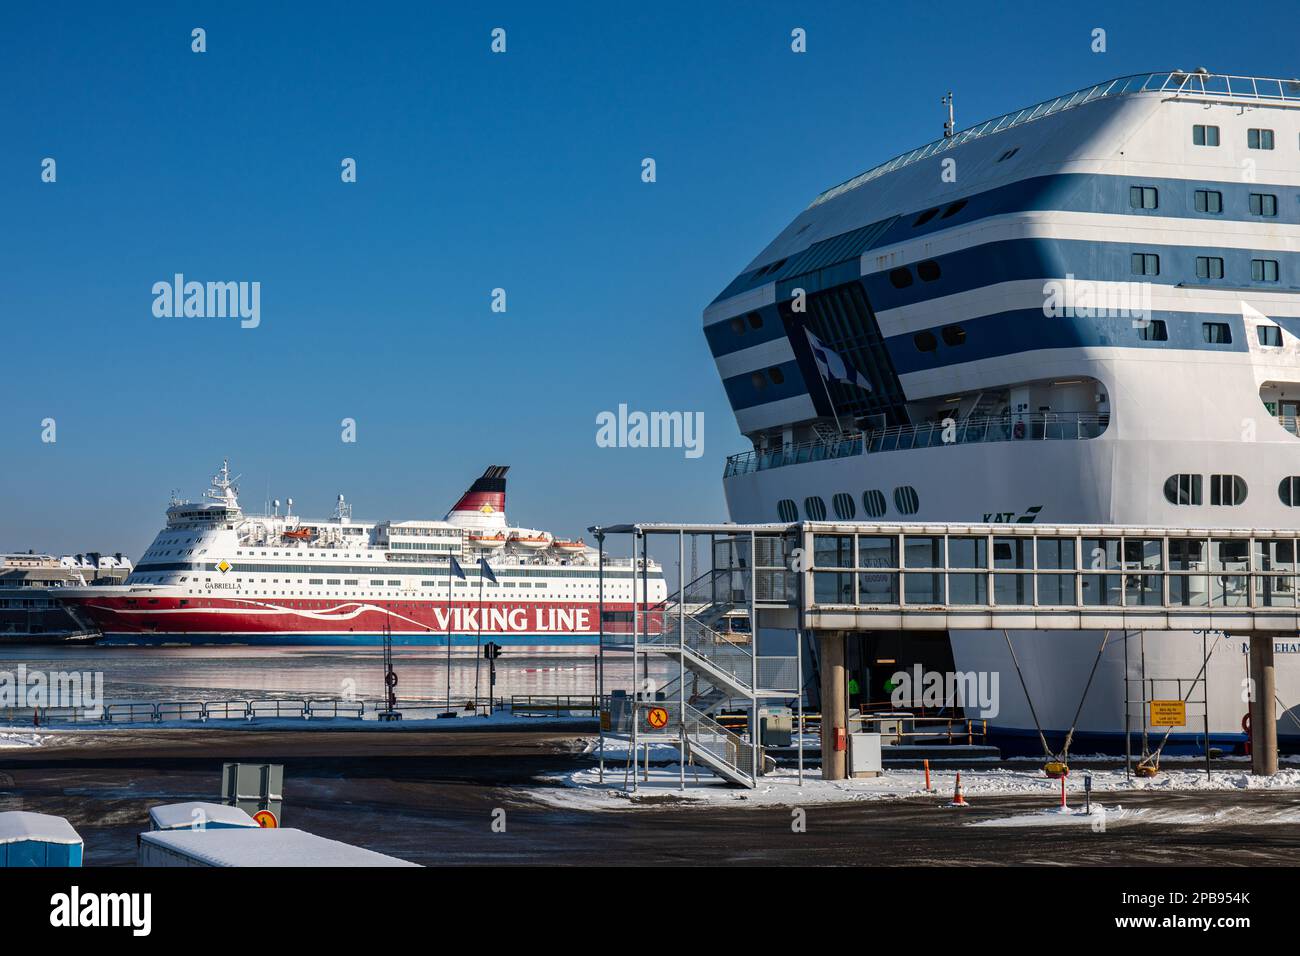 Rival shipping companies Viking Line and SIlja Line cruise ferries M/S Garbriella and M/S Silja Serenade moored in Helsinki, Finland Stock Photo